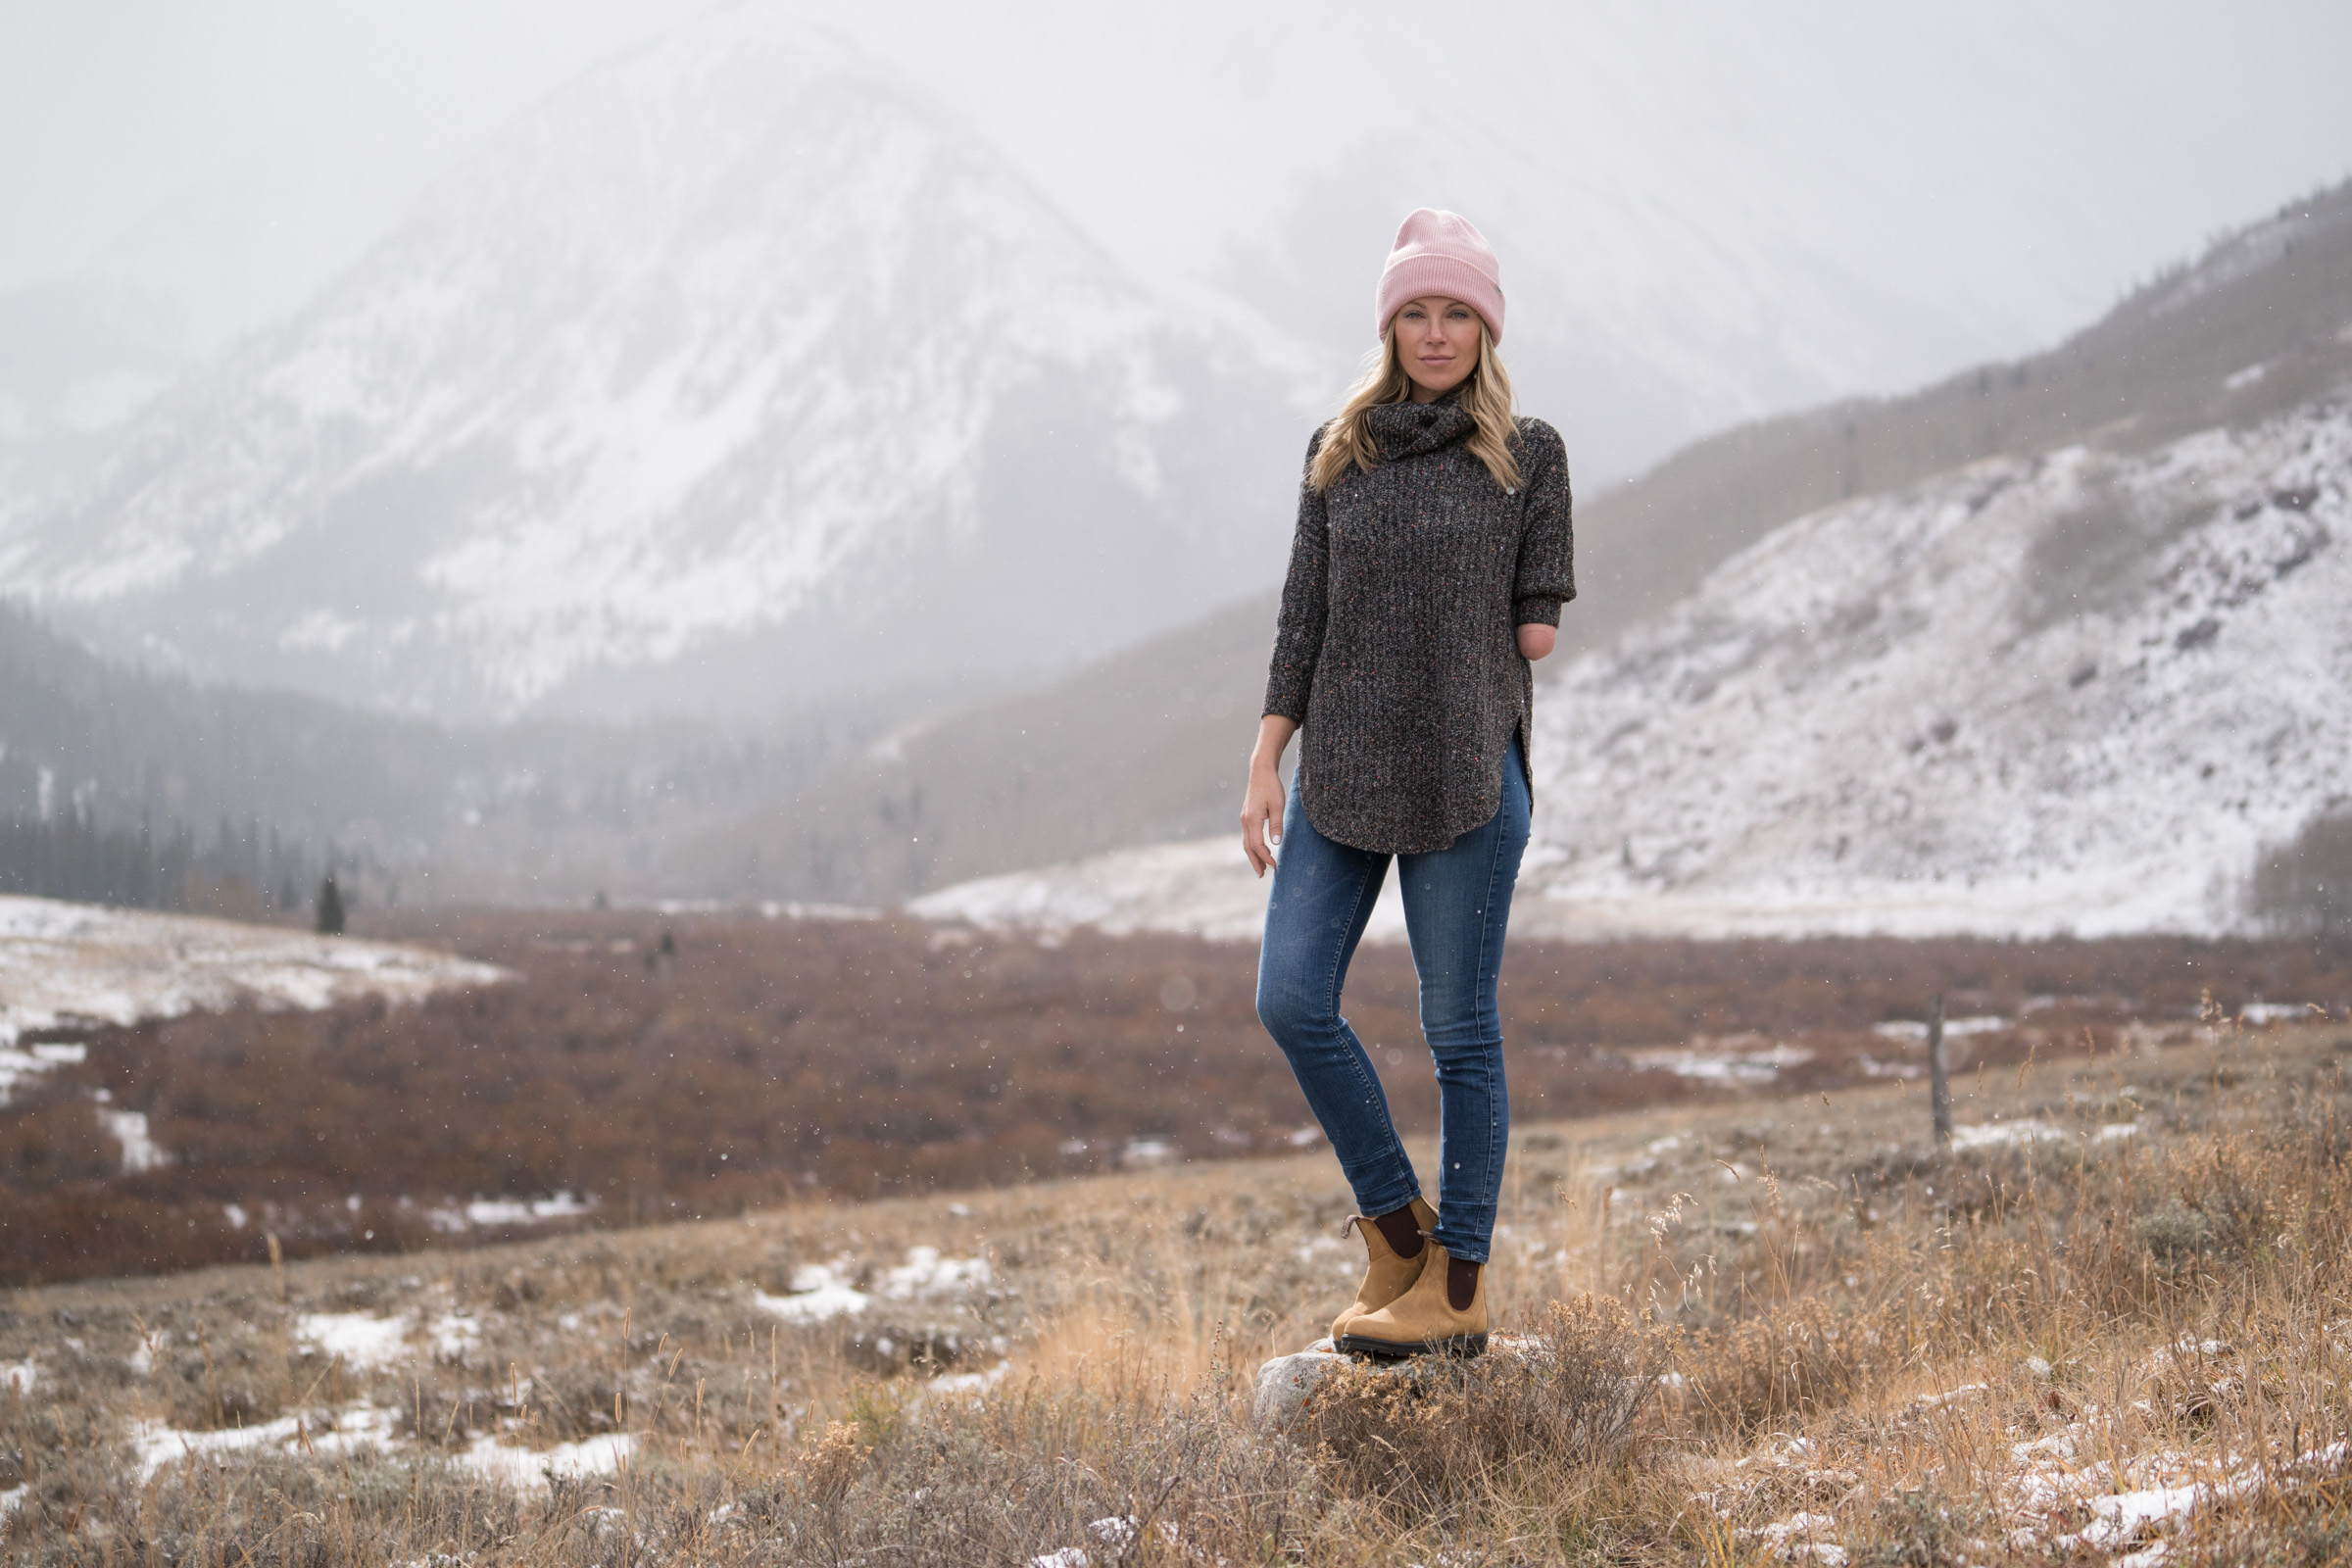 Sarah Herron, photographed by Dylan H. Brown, wearing Blundstone Boots near Ashcroft, Colorado